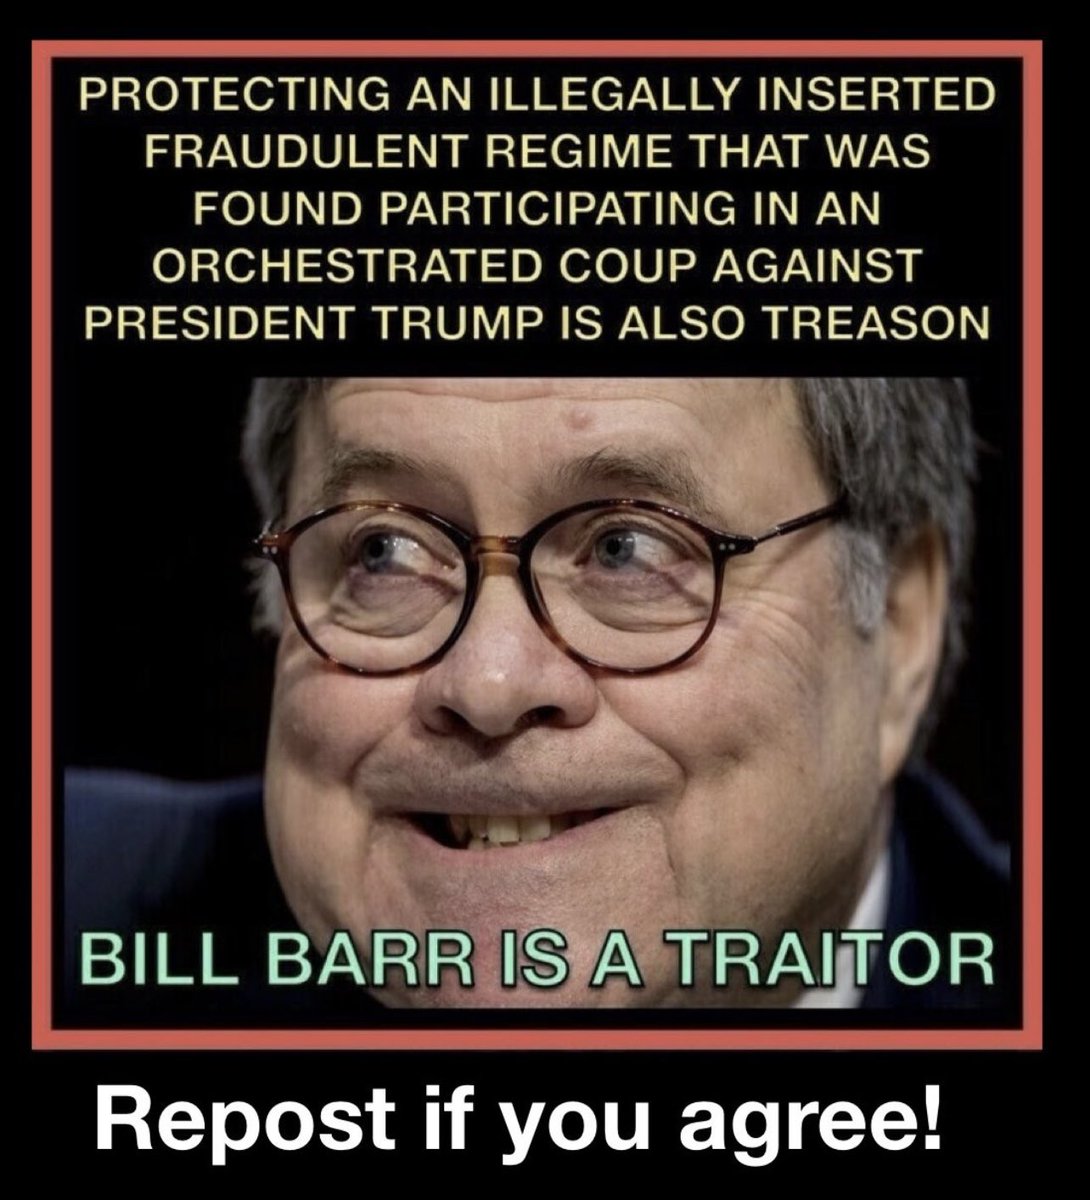 Now this worthless traitor is endorsing Trump? Hilarious. Who agrees that Bill Barr is one of the biggest reasons our country is in the perilous state it is in due to him? 🙋‍♂️